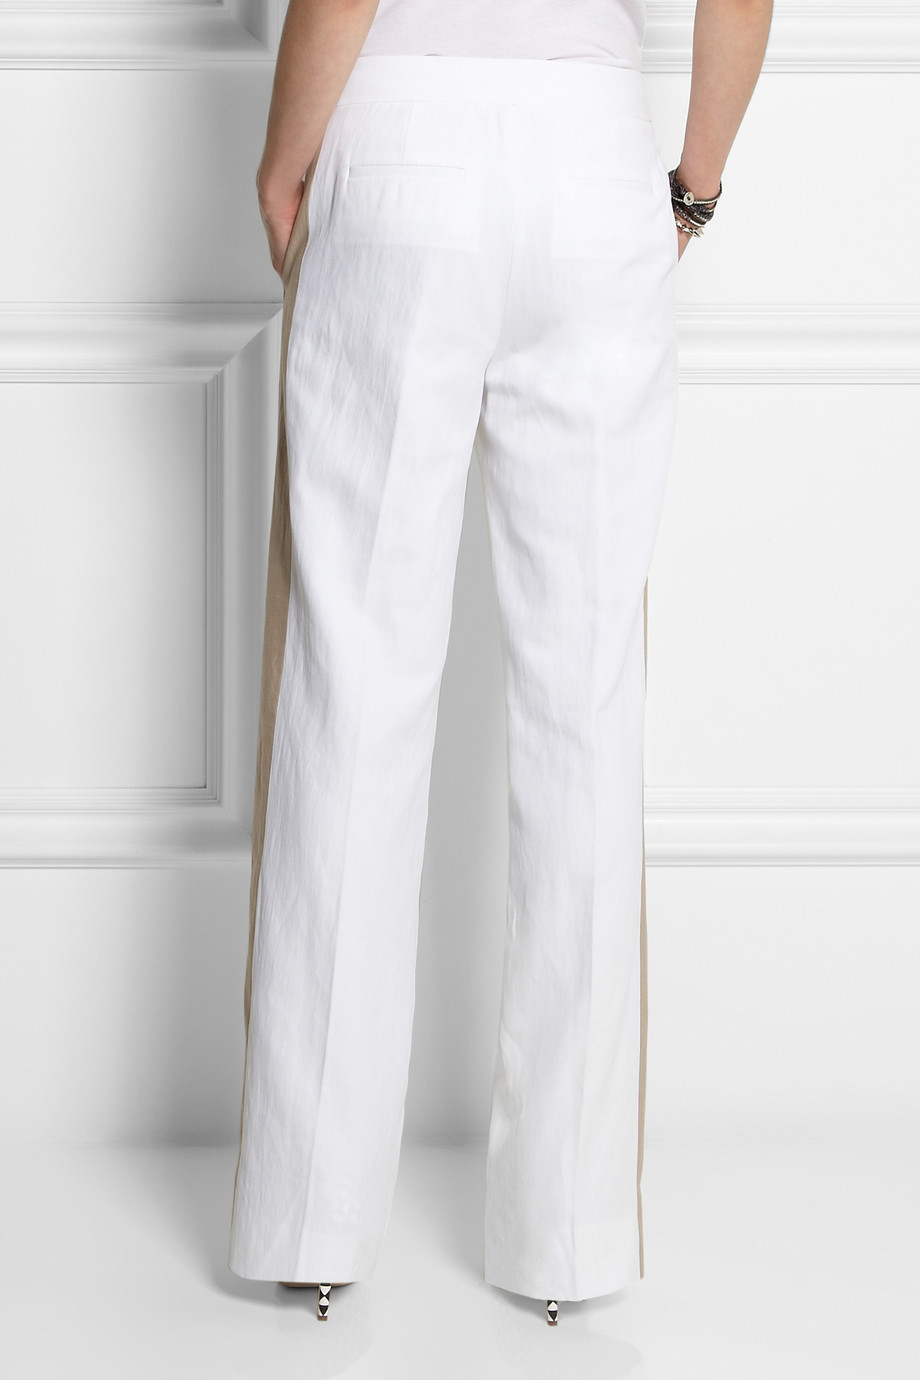 J.Crew Collection Cotton And Linen-Blend Wide-Leg Pants in White - Lyst